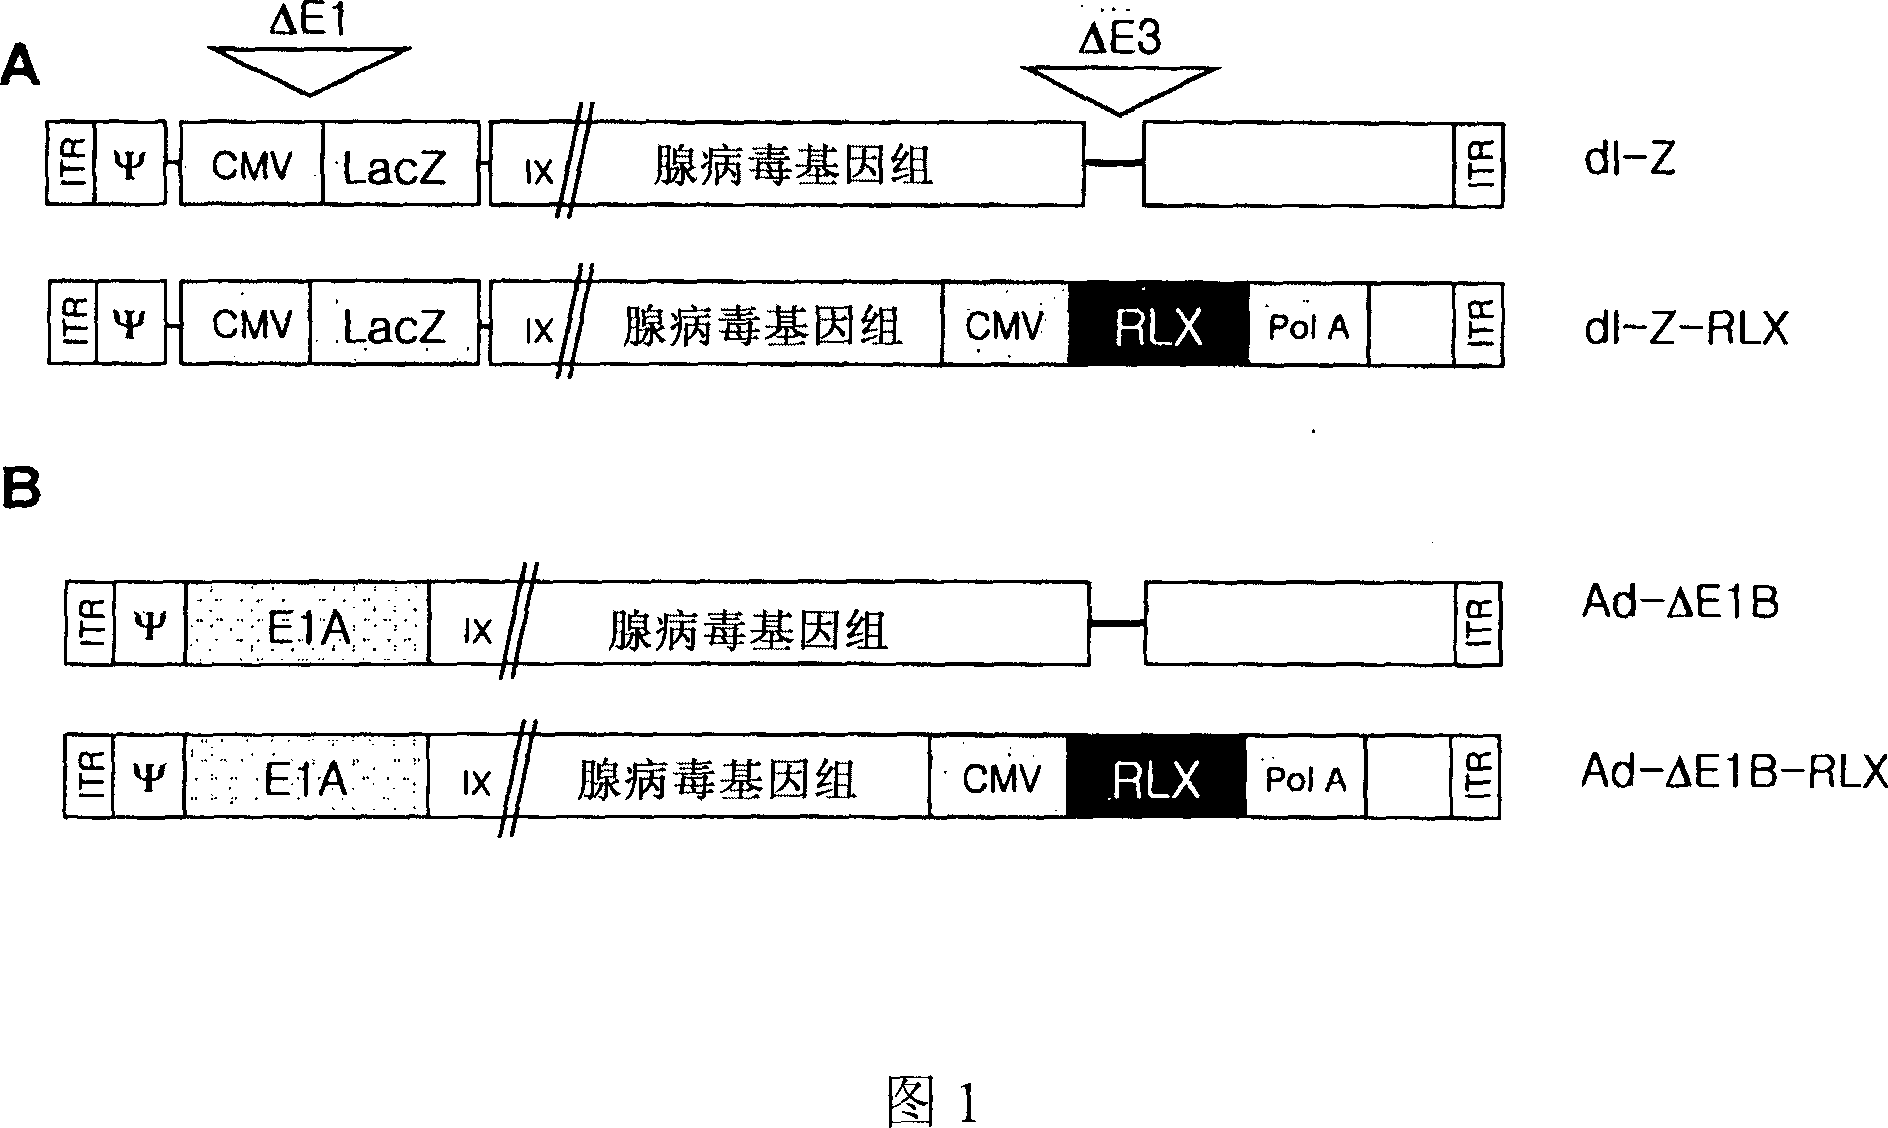 Gene delivery system containing relaxin gene and pharmaceutical composition using relaxin